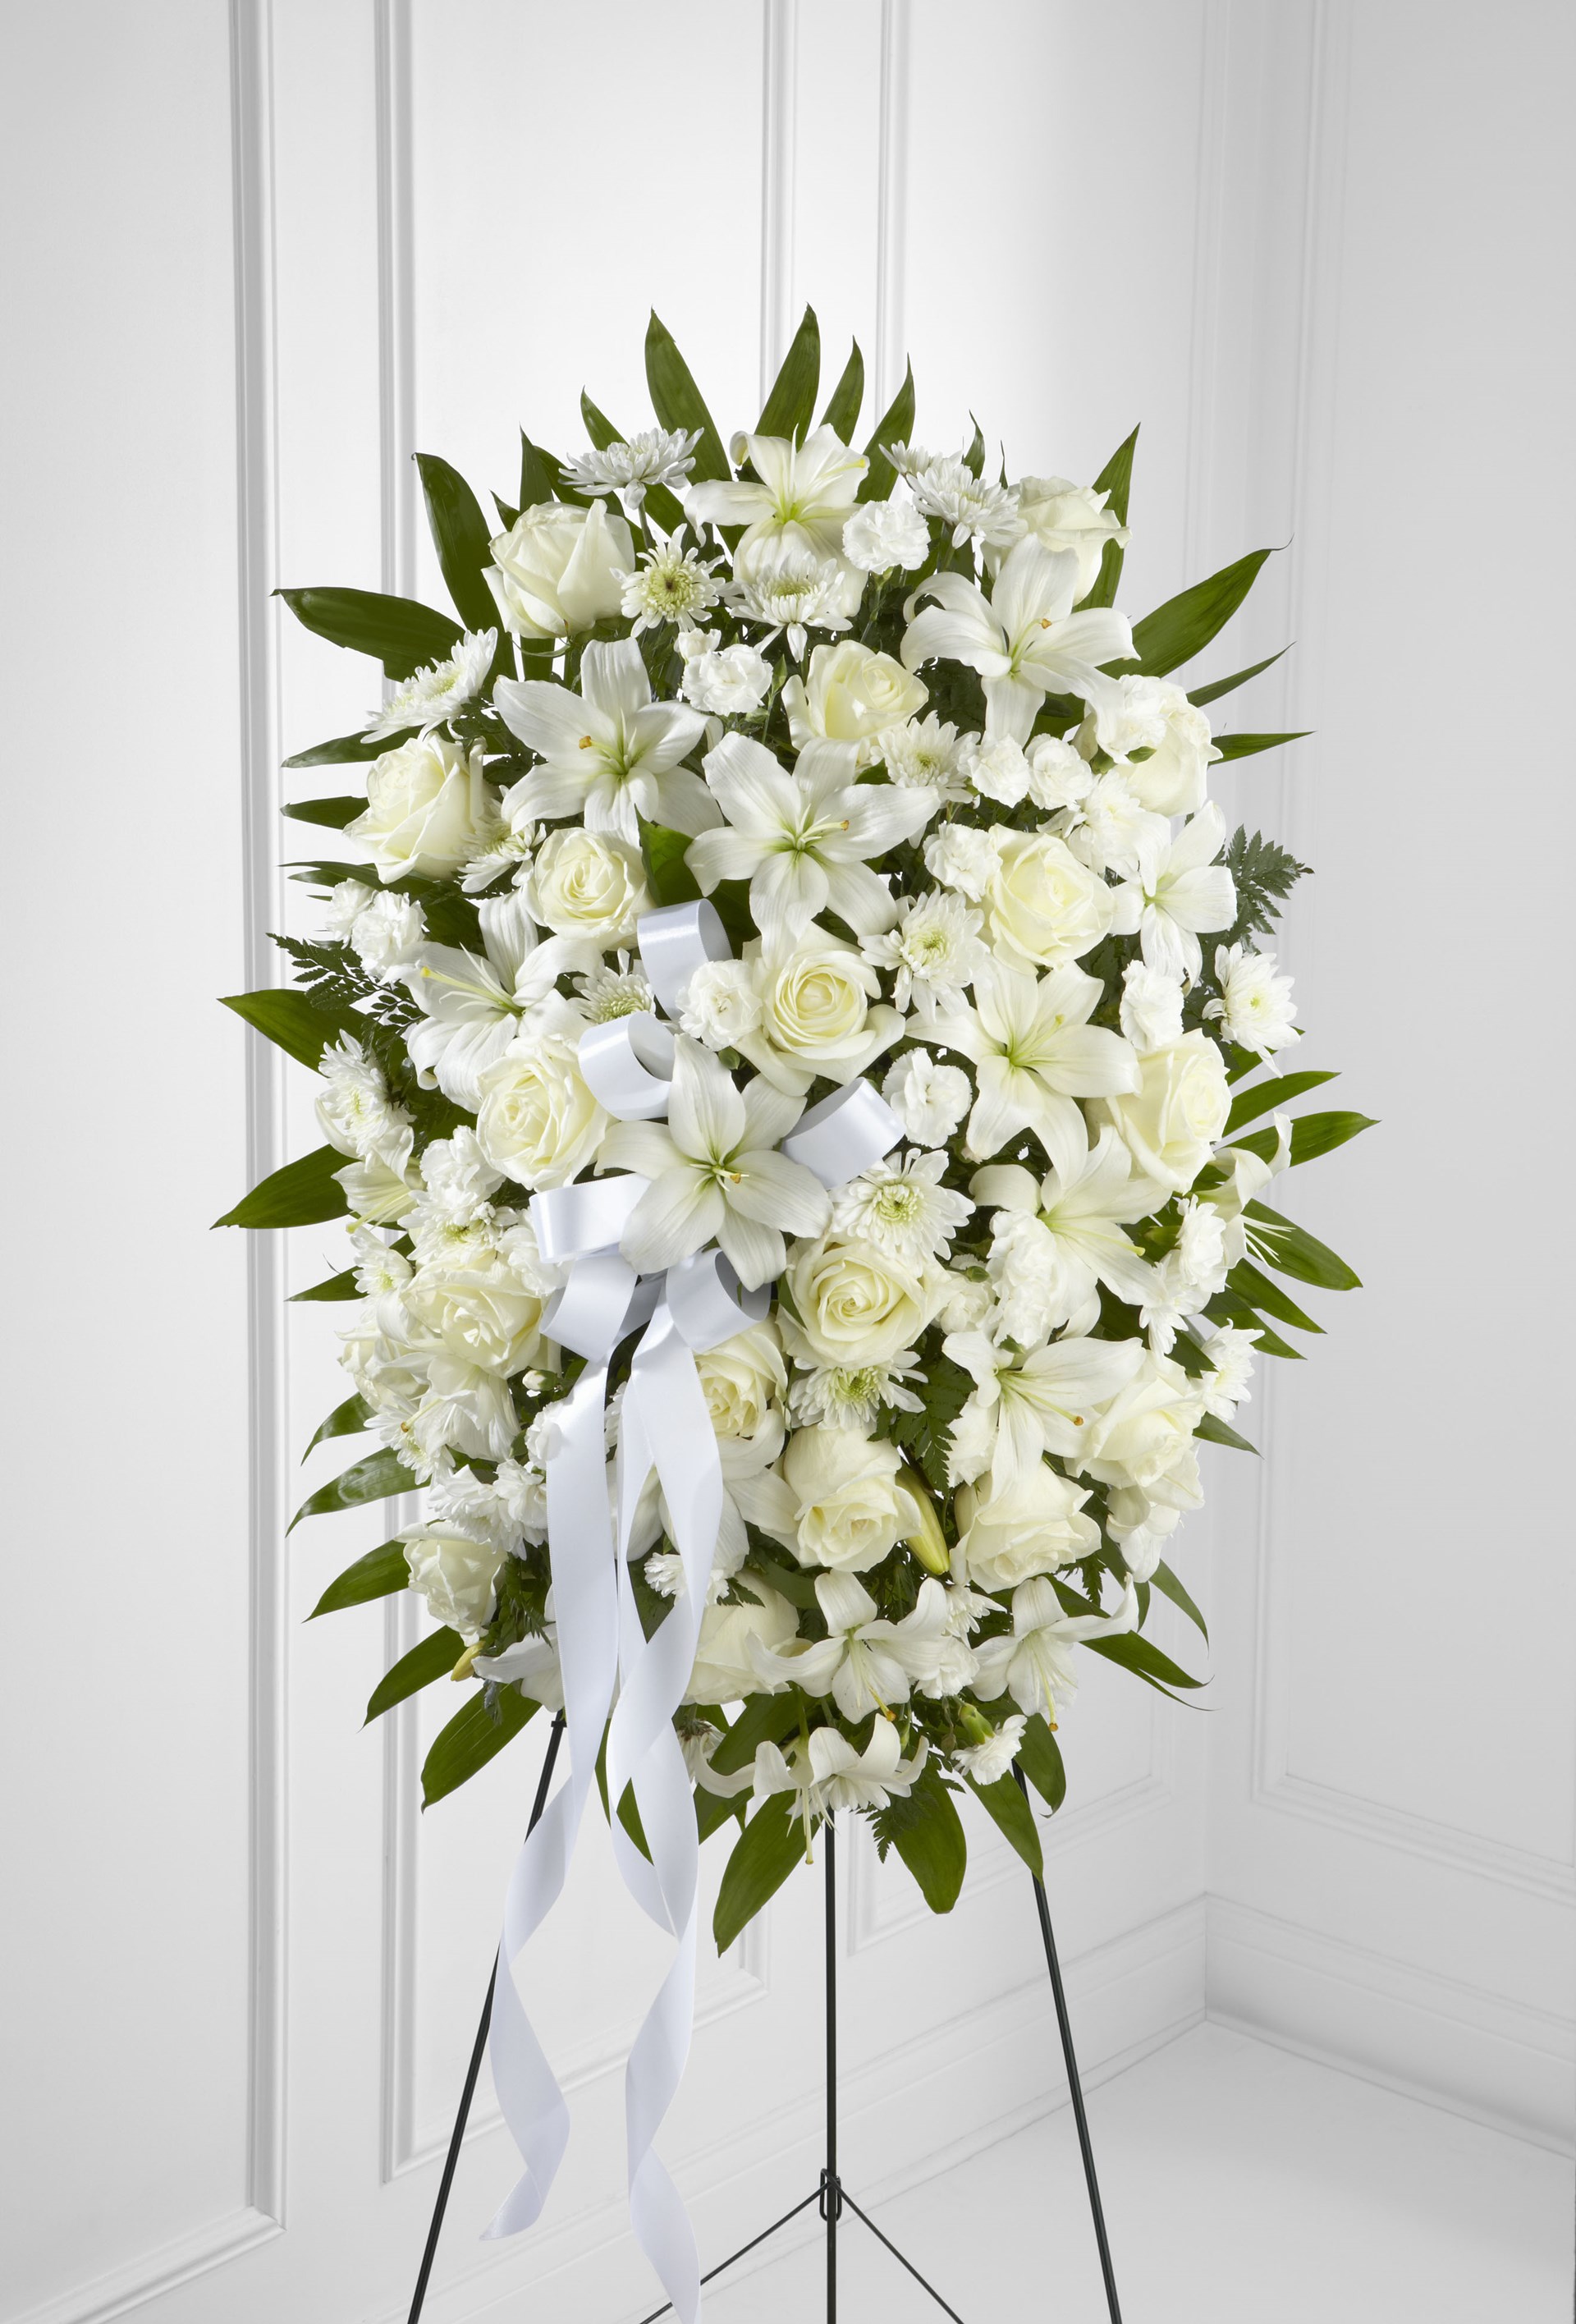 product image for Exquisite Tribute